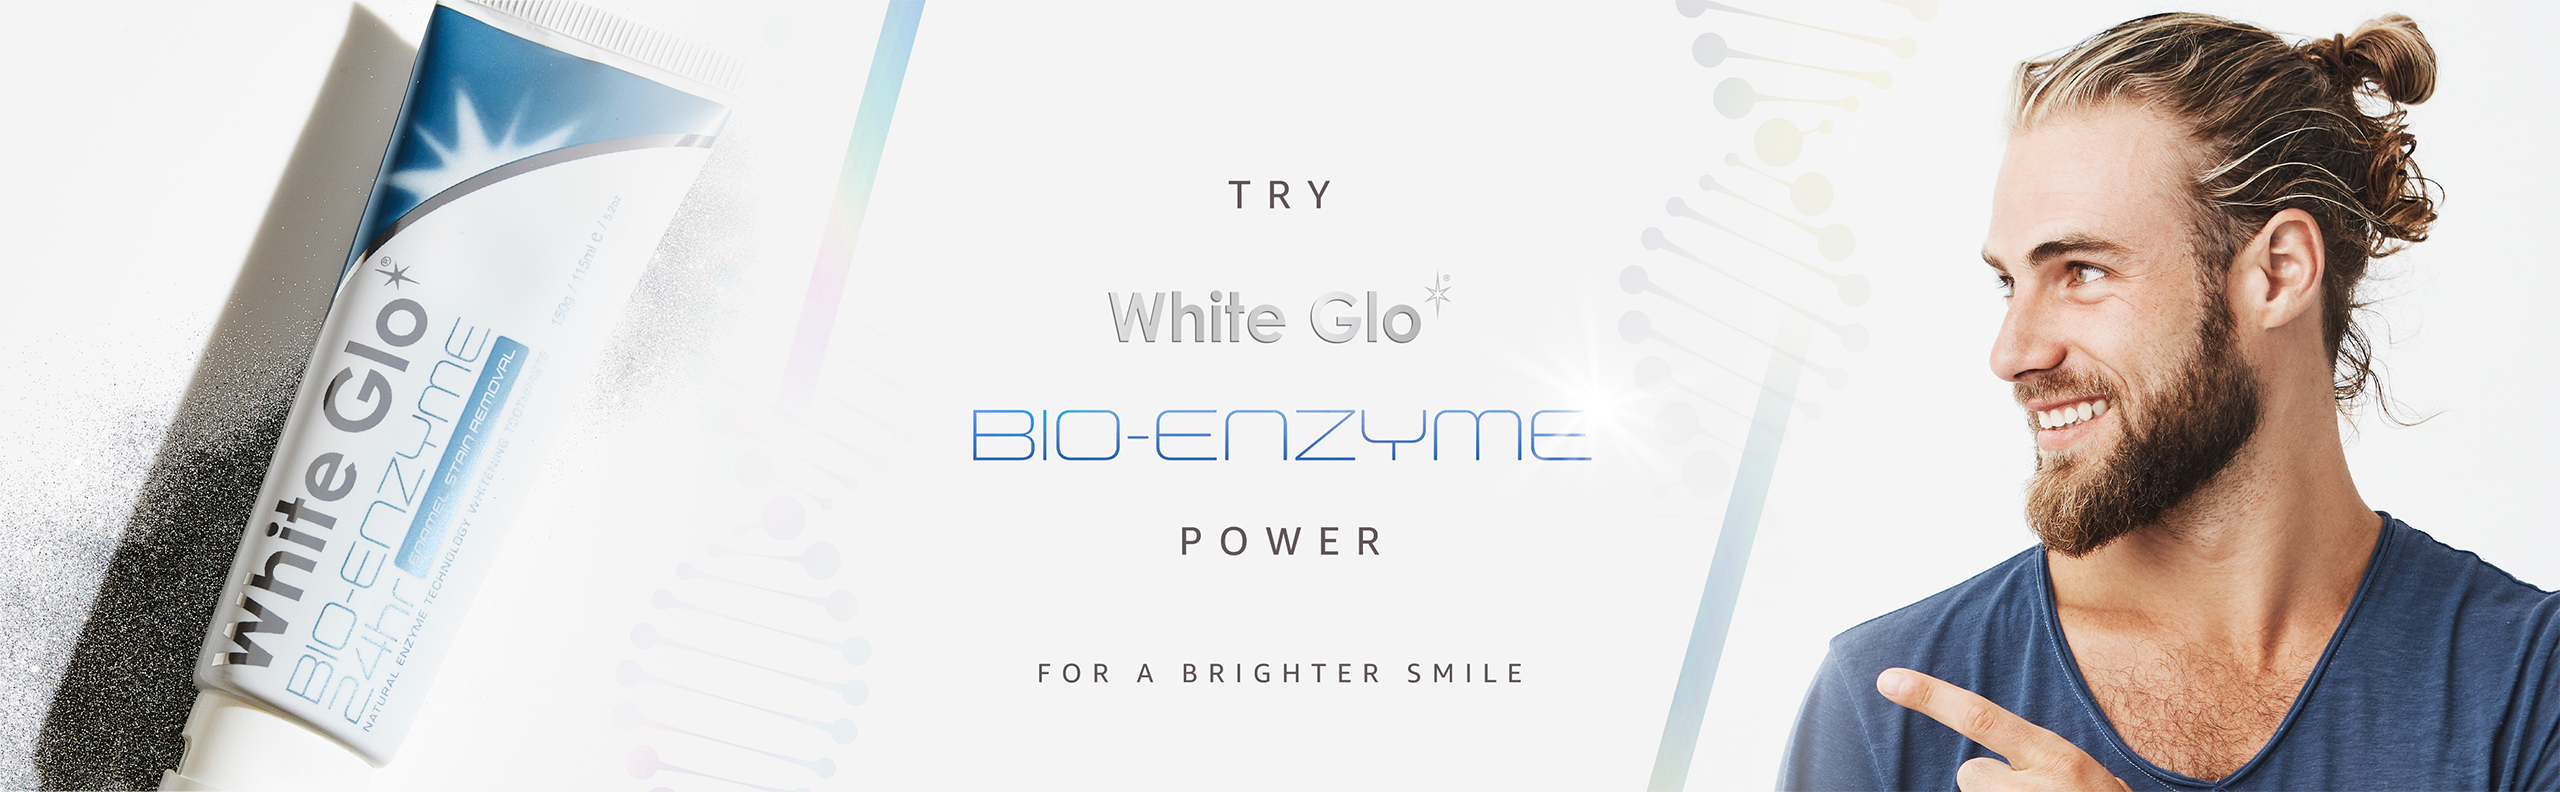 Bio Enzyme Toothpaste Banner